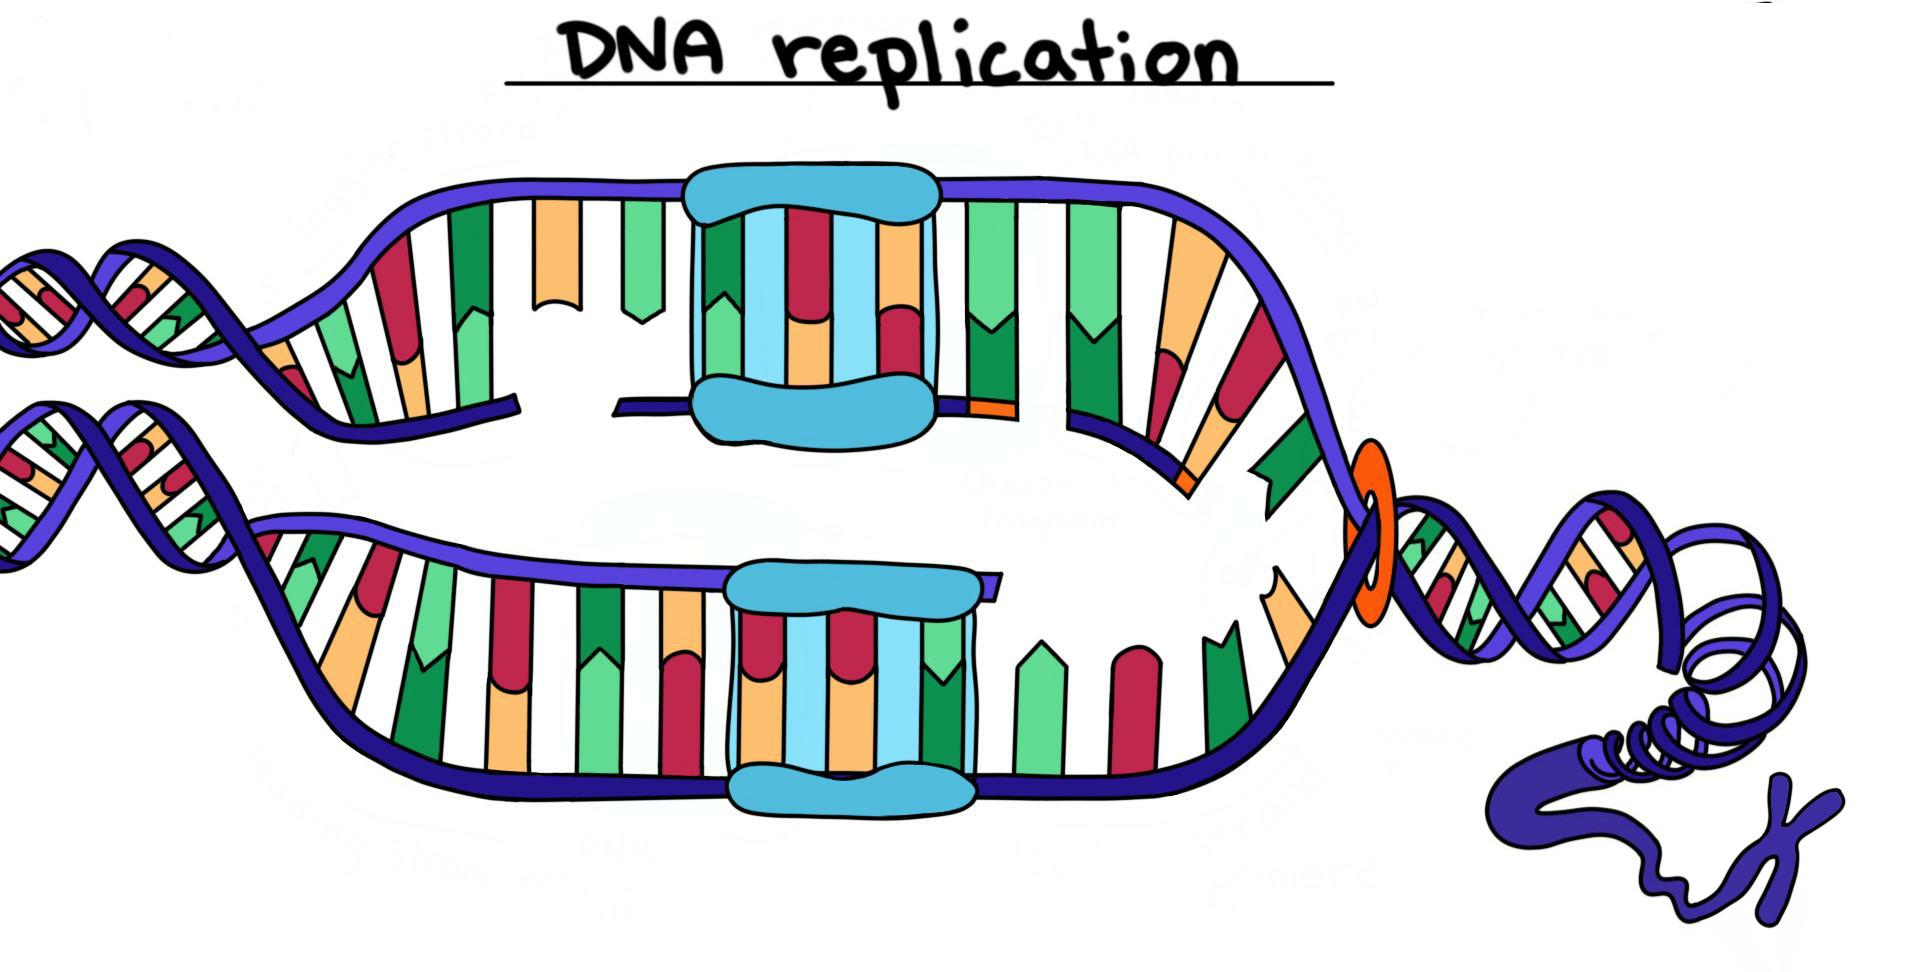 DNA structure and replication - Quiz.